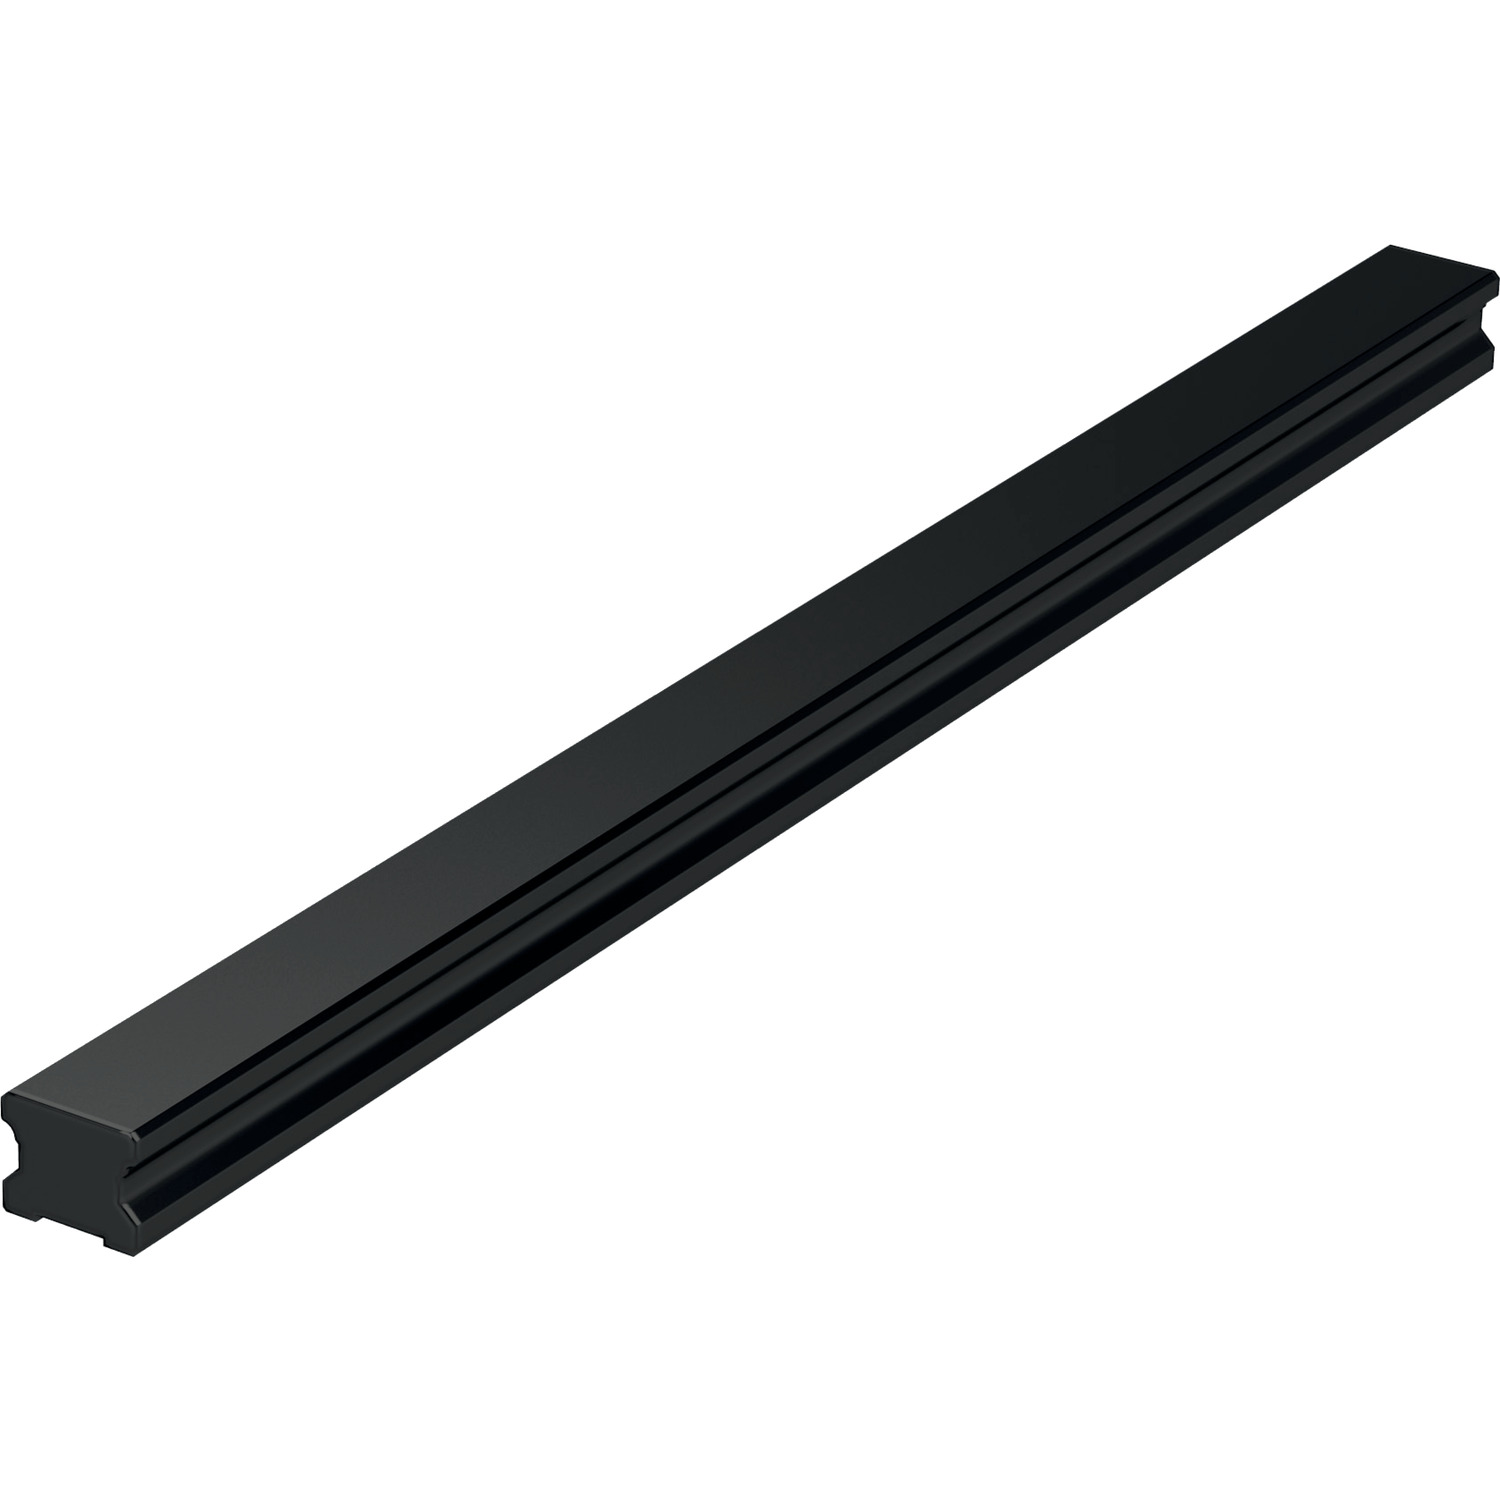 Product L1016.BR, 20mm Linear Guide Rail rear fixing, blackened / 